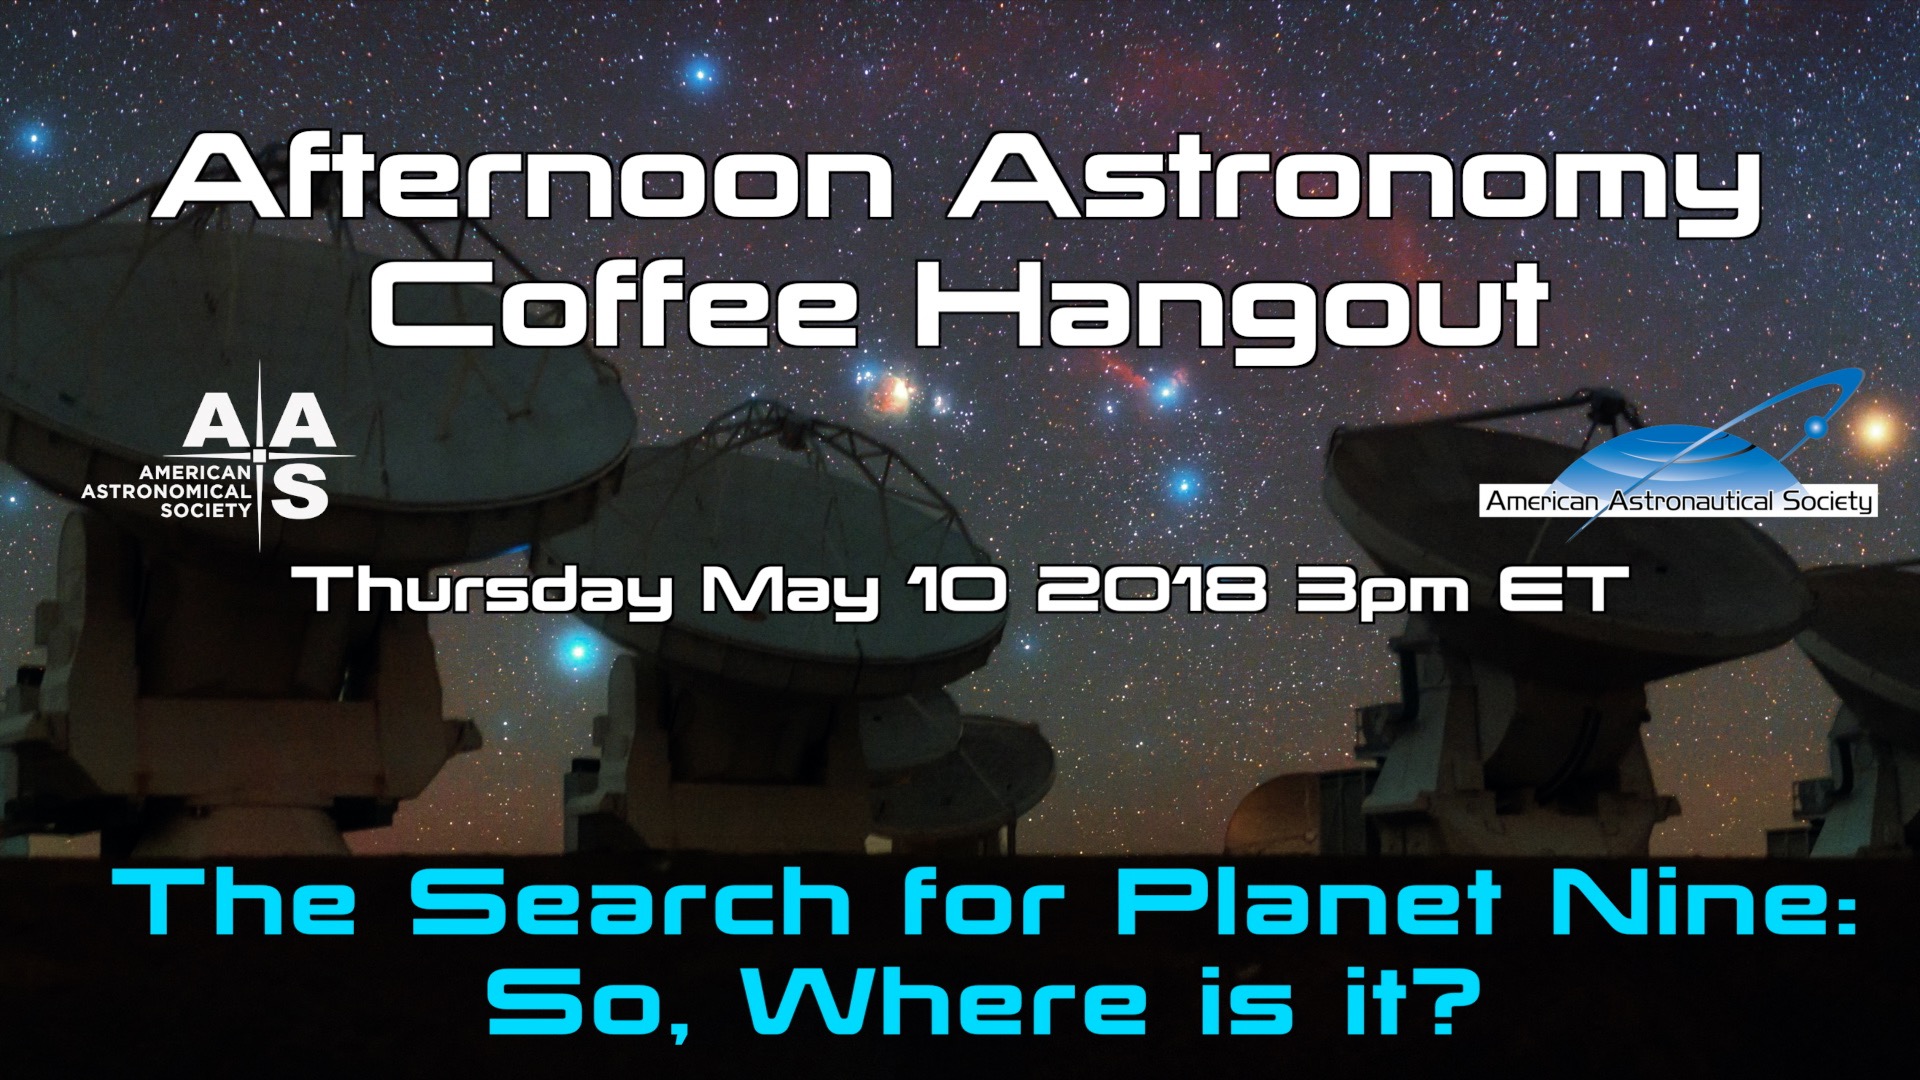 Afternoon Astronomy Coffee Hangout